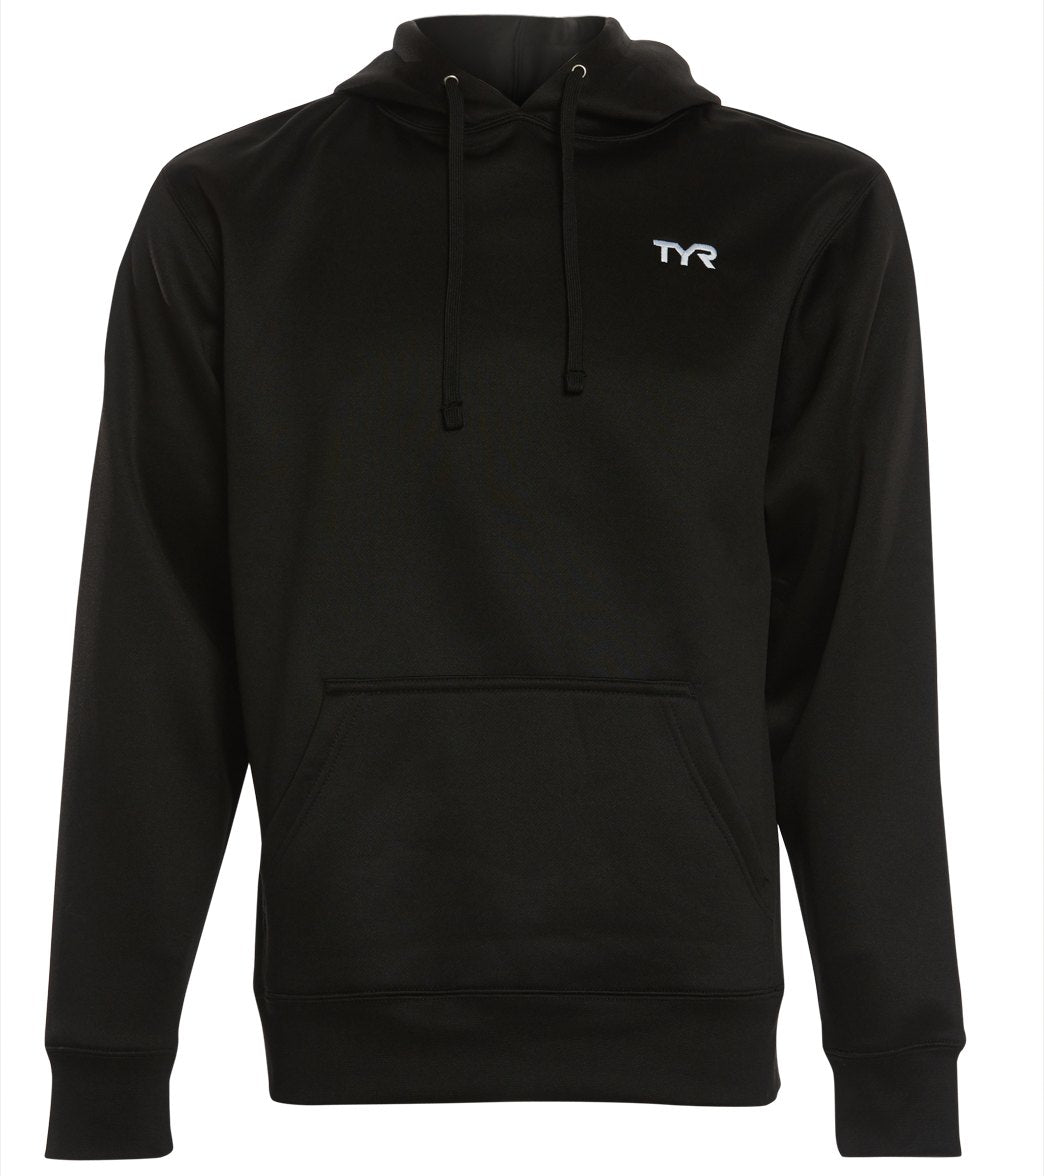 TYR Men's Alliance Pullover Hoodie - Black Xl Cotton/Polyester - Swimoutlet.com